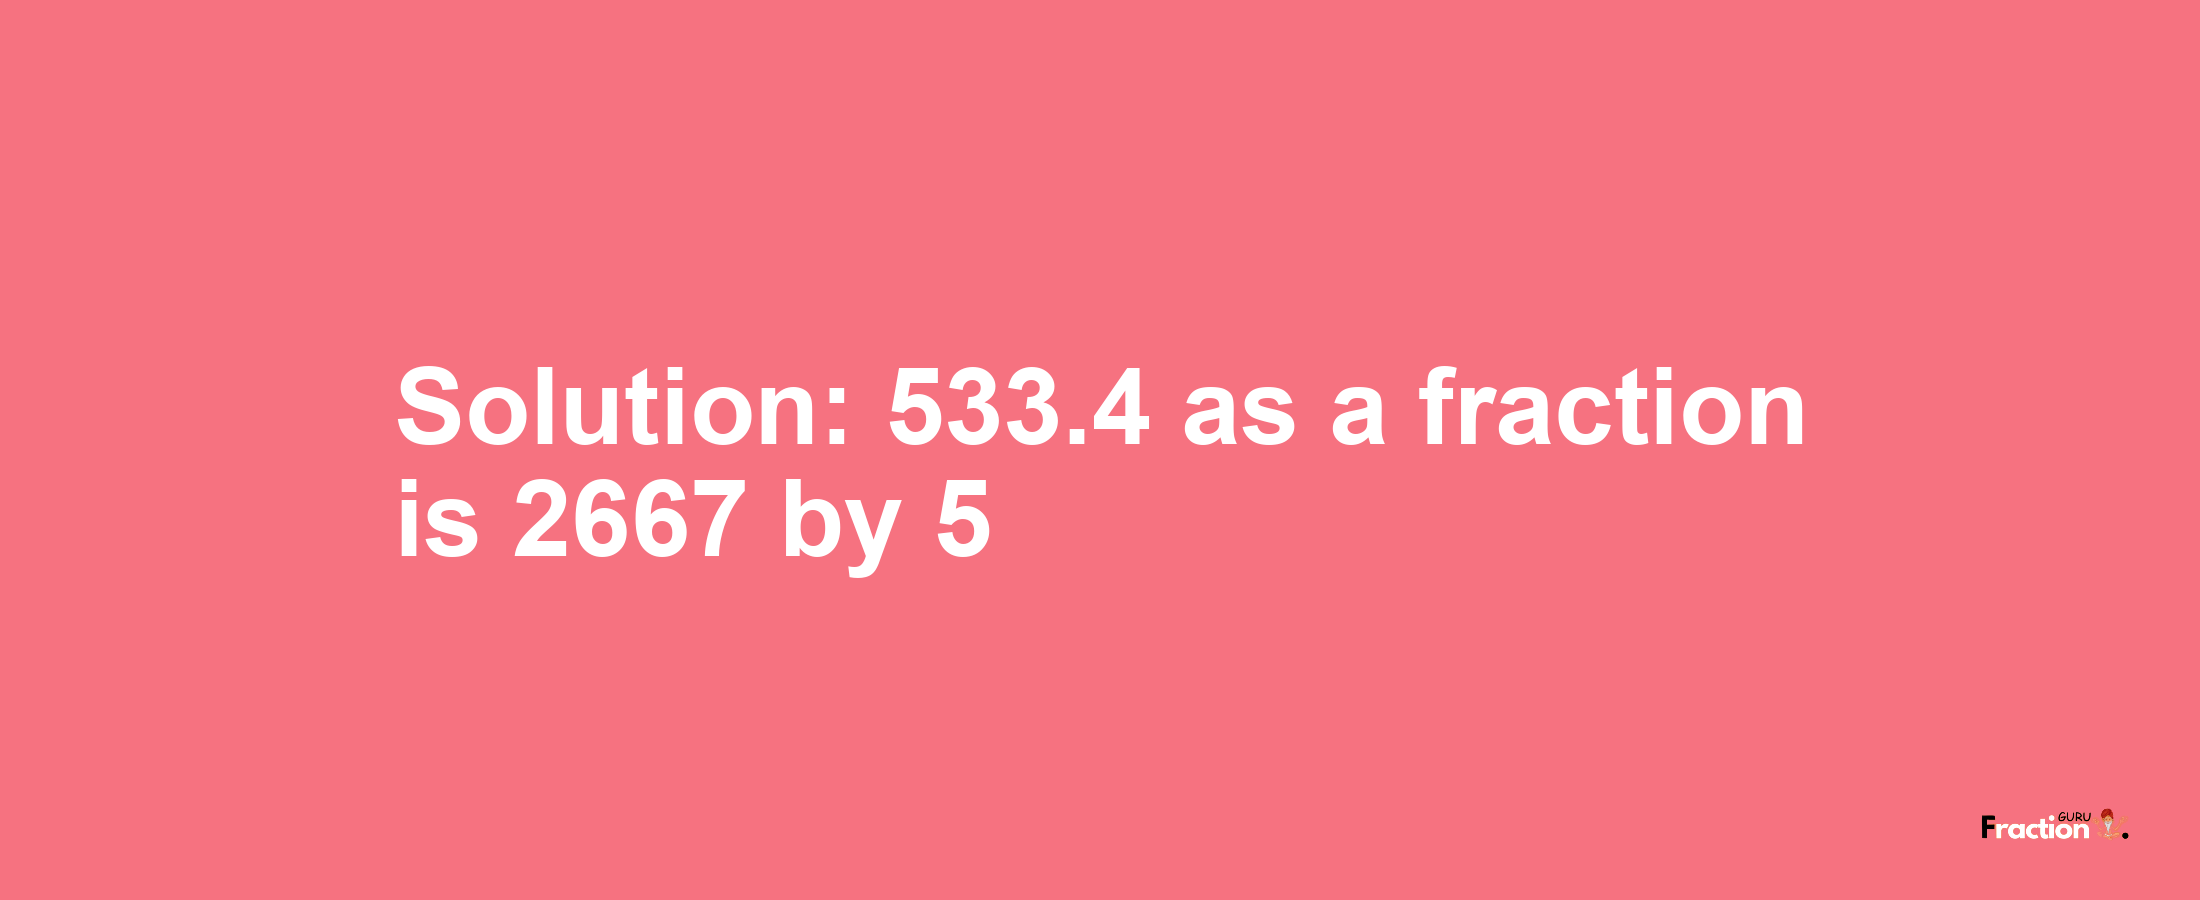 Solution:533.4 as a fraction is 2667/5